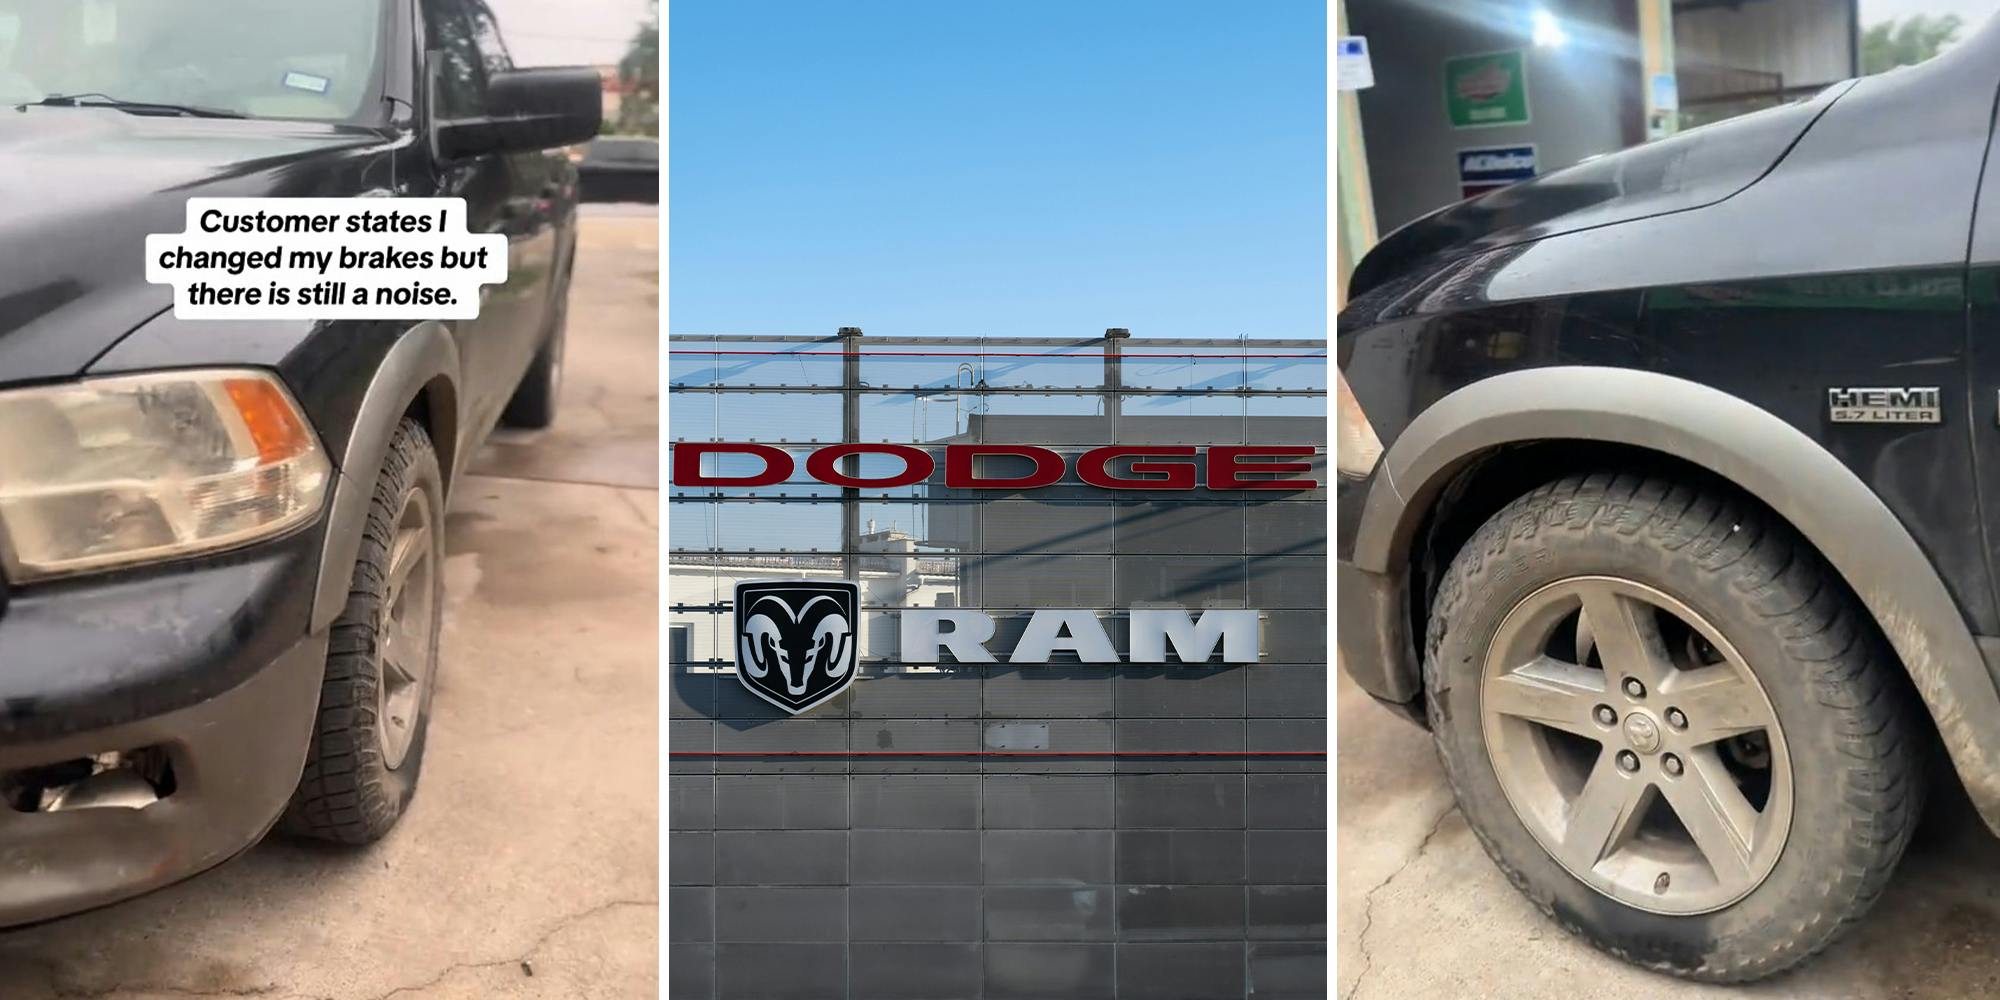 Ram driver changes his brakes. But there's still a mysterious noise